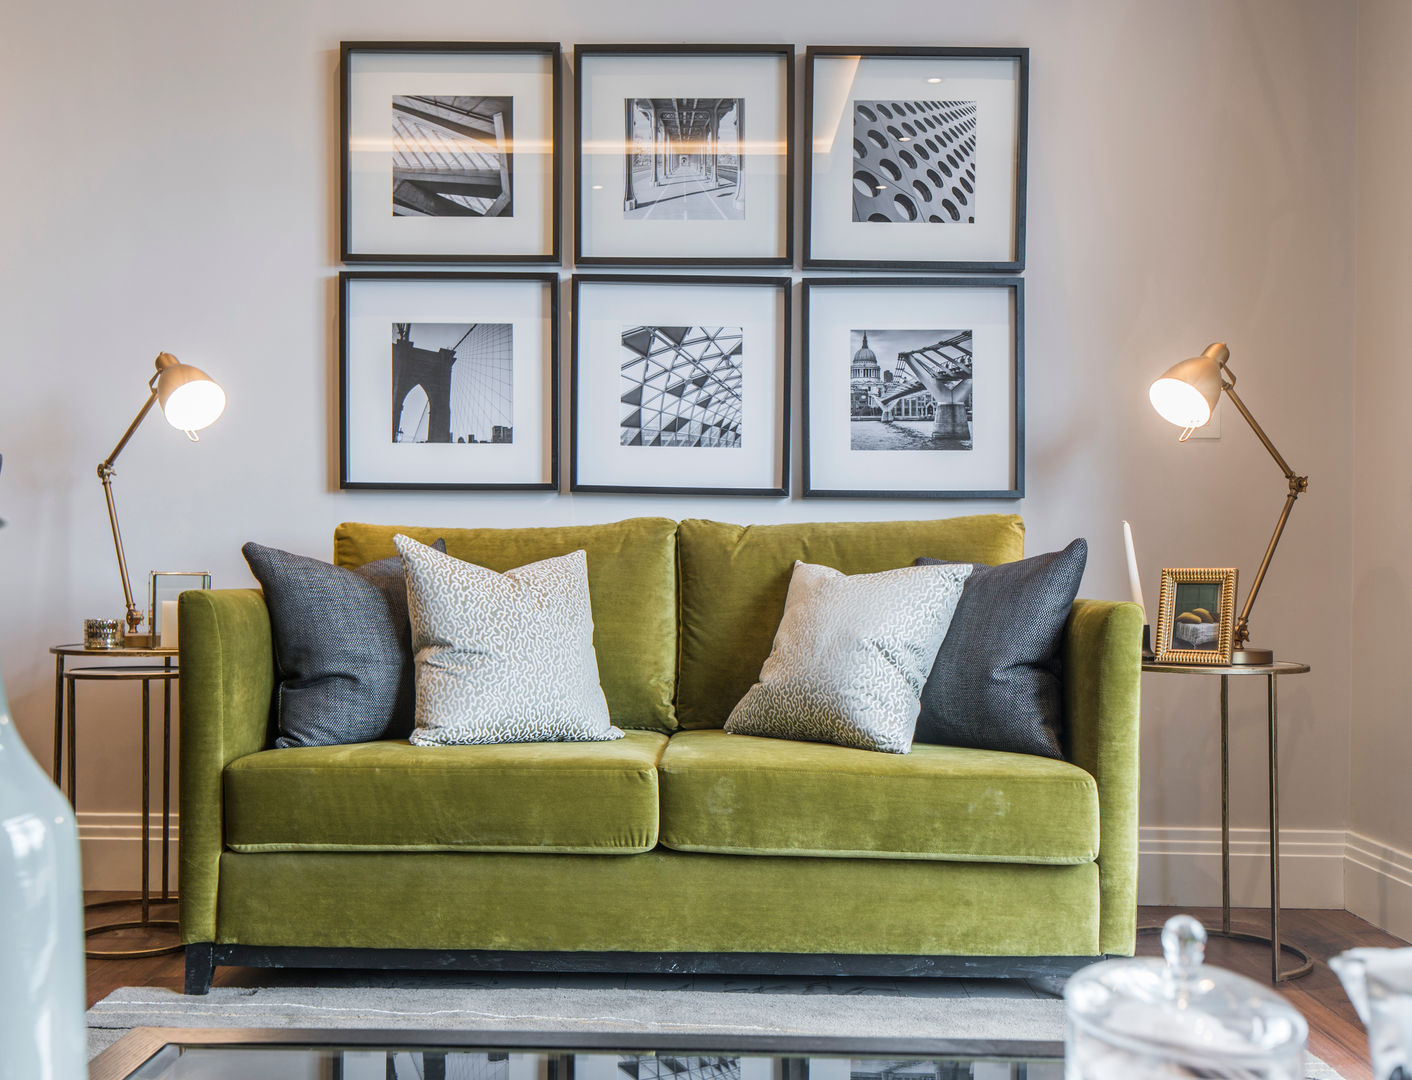 Musewll Hill, London Jigsaw Interior Architecture & Design Eclectic style living room Copper/Bronze/Brass green sofa,velvet,luxury,picture wall,gallery,textiles,living room,jigsaw interiors,copper,brass